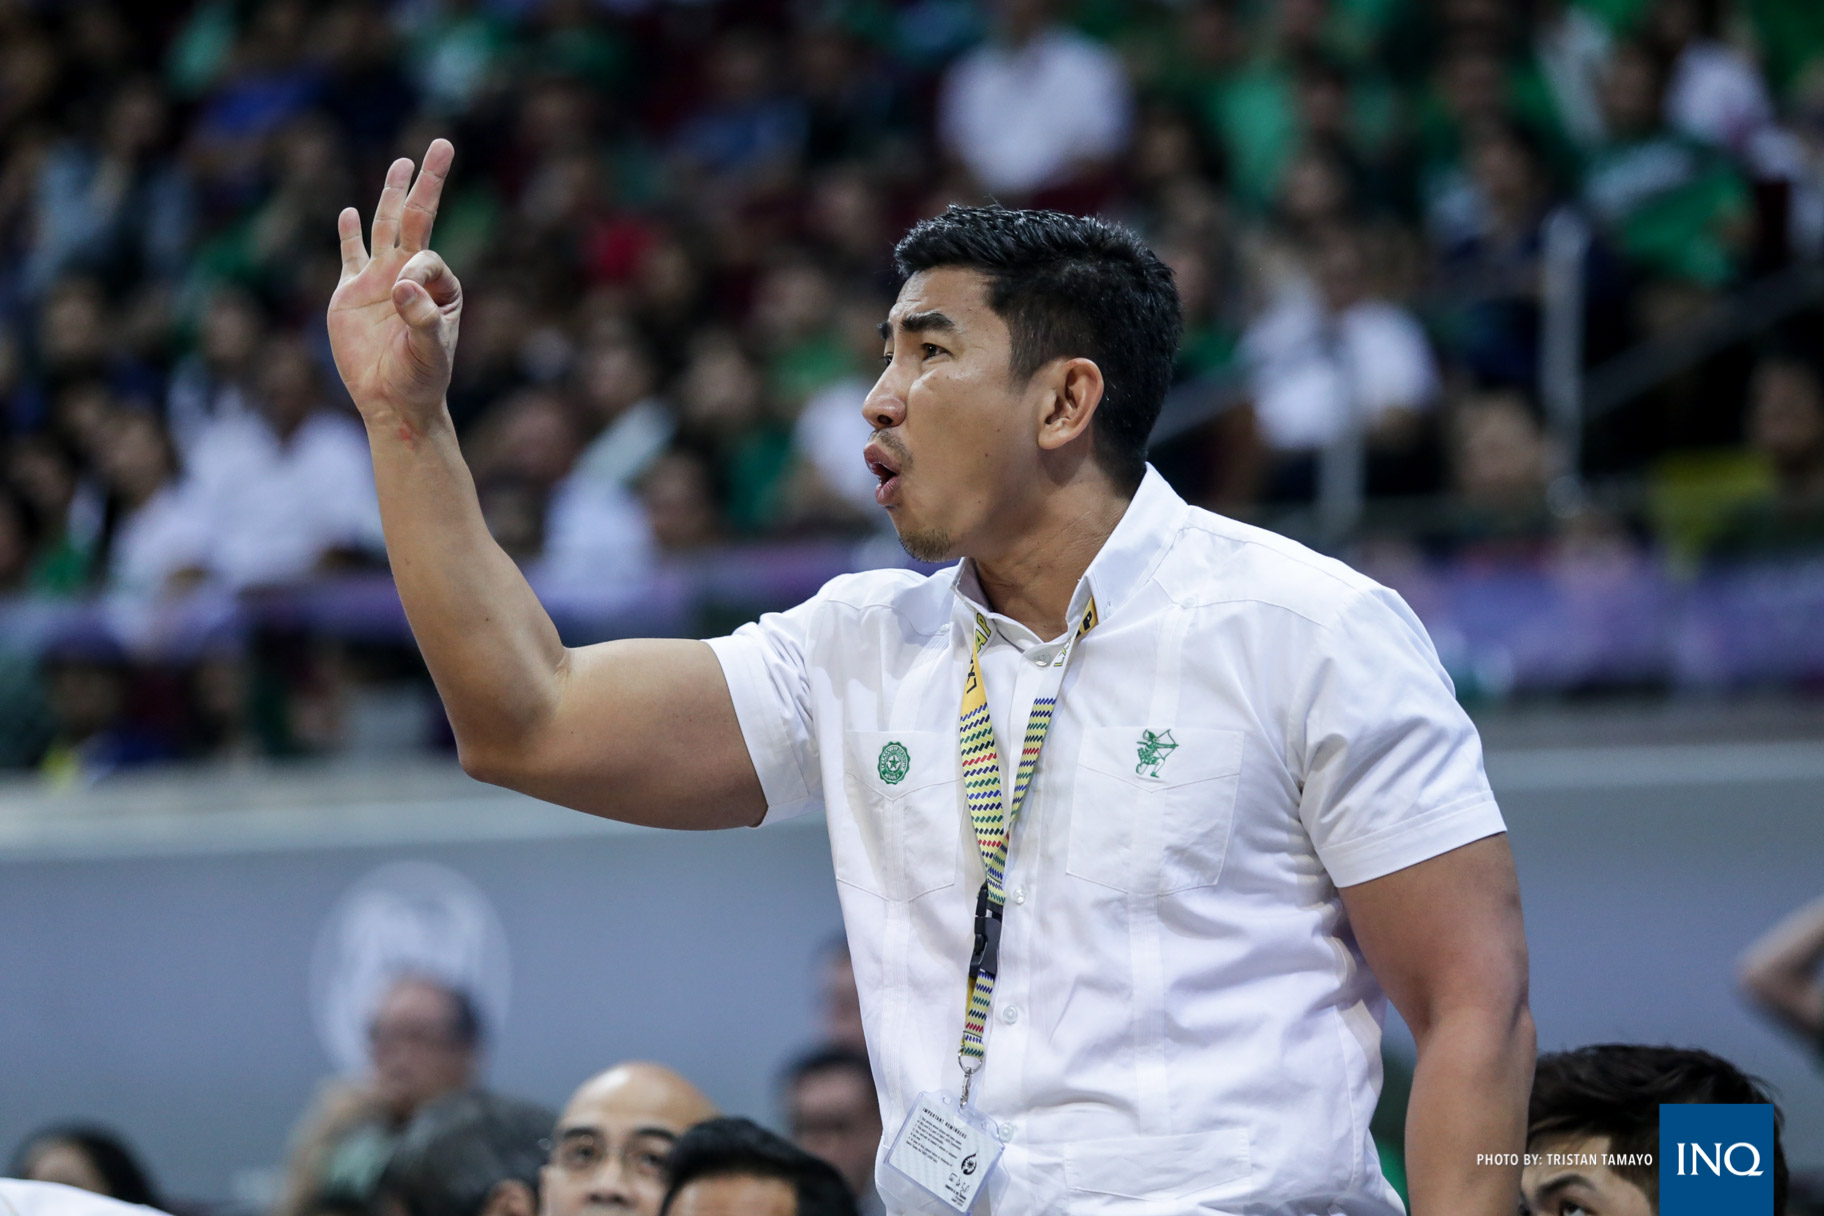 La Salle head coach Aldin Ayo gives out instructions to his players during their game against Ateneo in Game 1 of the UAAP Season 79 men's basketball Finals Saturday, Dec 3, 2016 at Mall of Asia Arena. Tristan Tamayo/INQUIRER.net